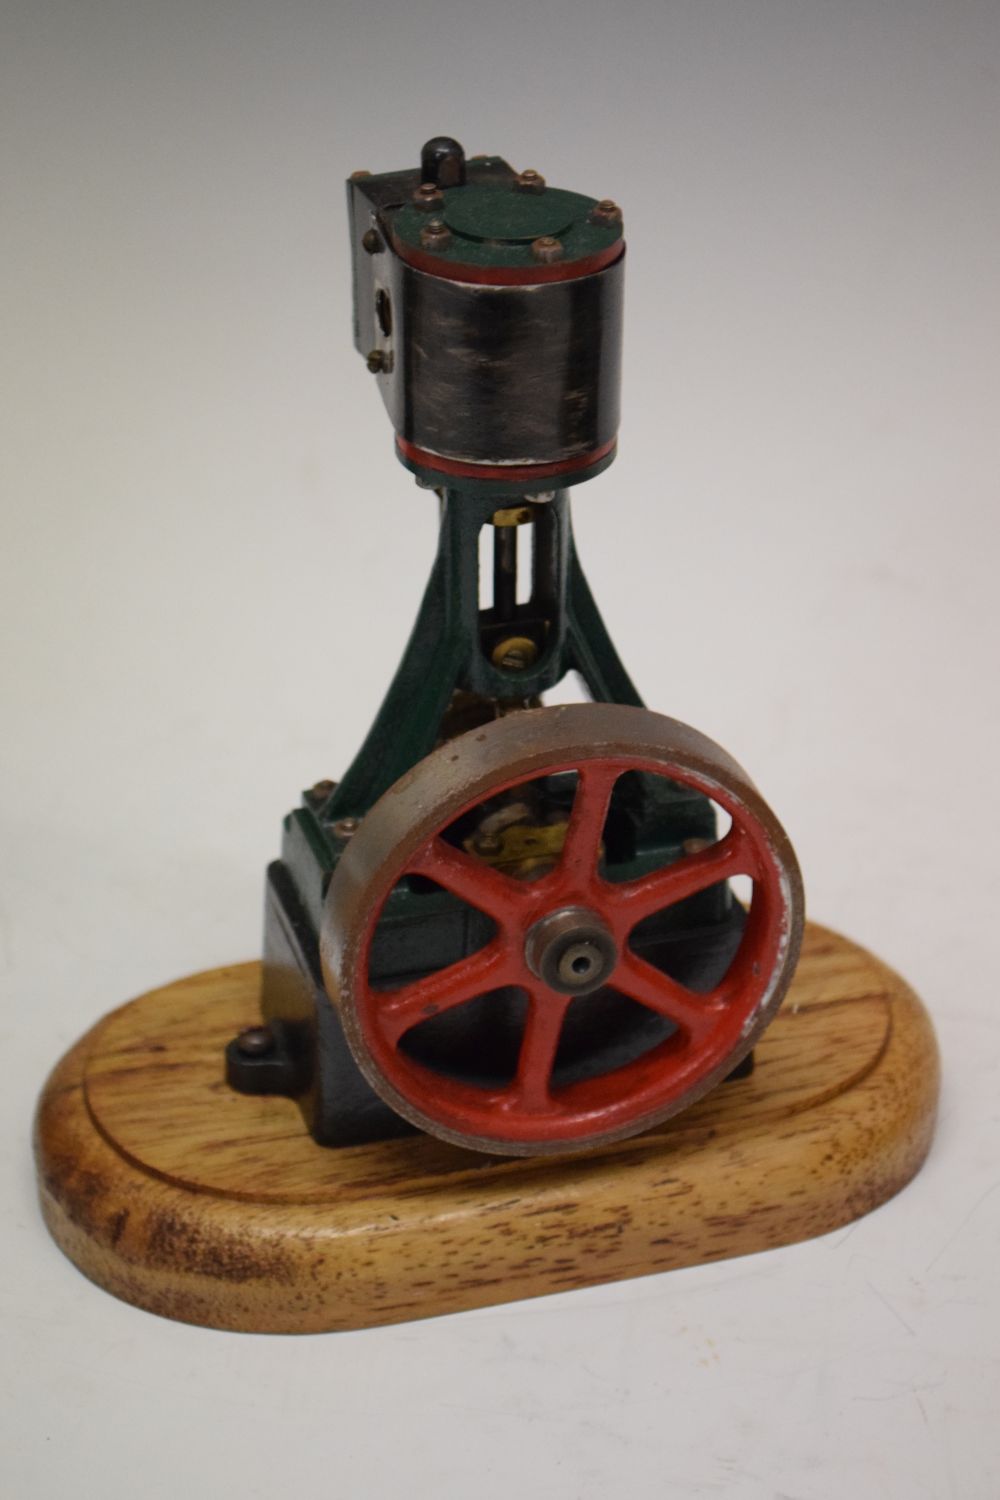 Stuart Turner model No.10 stationary steam engine, with 3-inch single fly wheel, 15cm high, on - Image 8 of 11